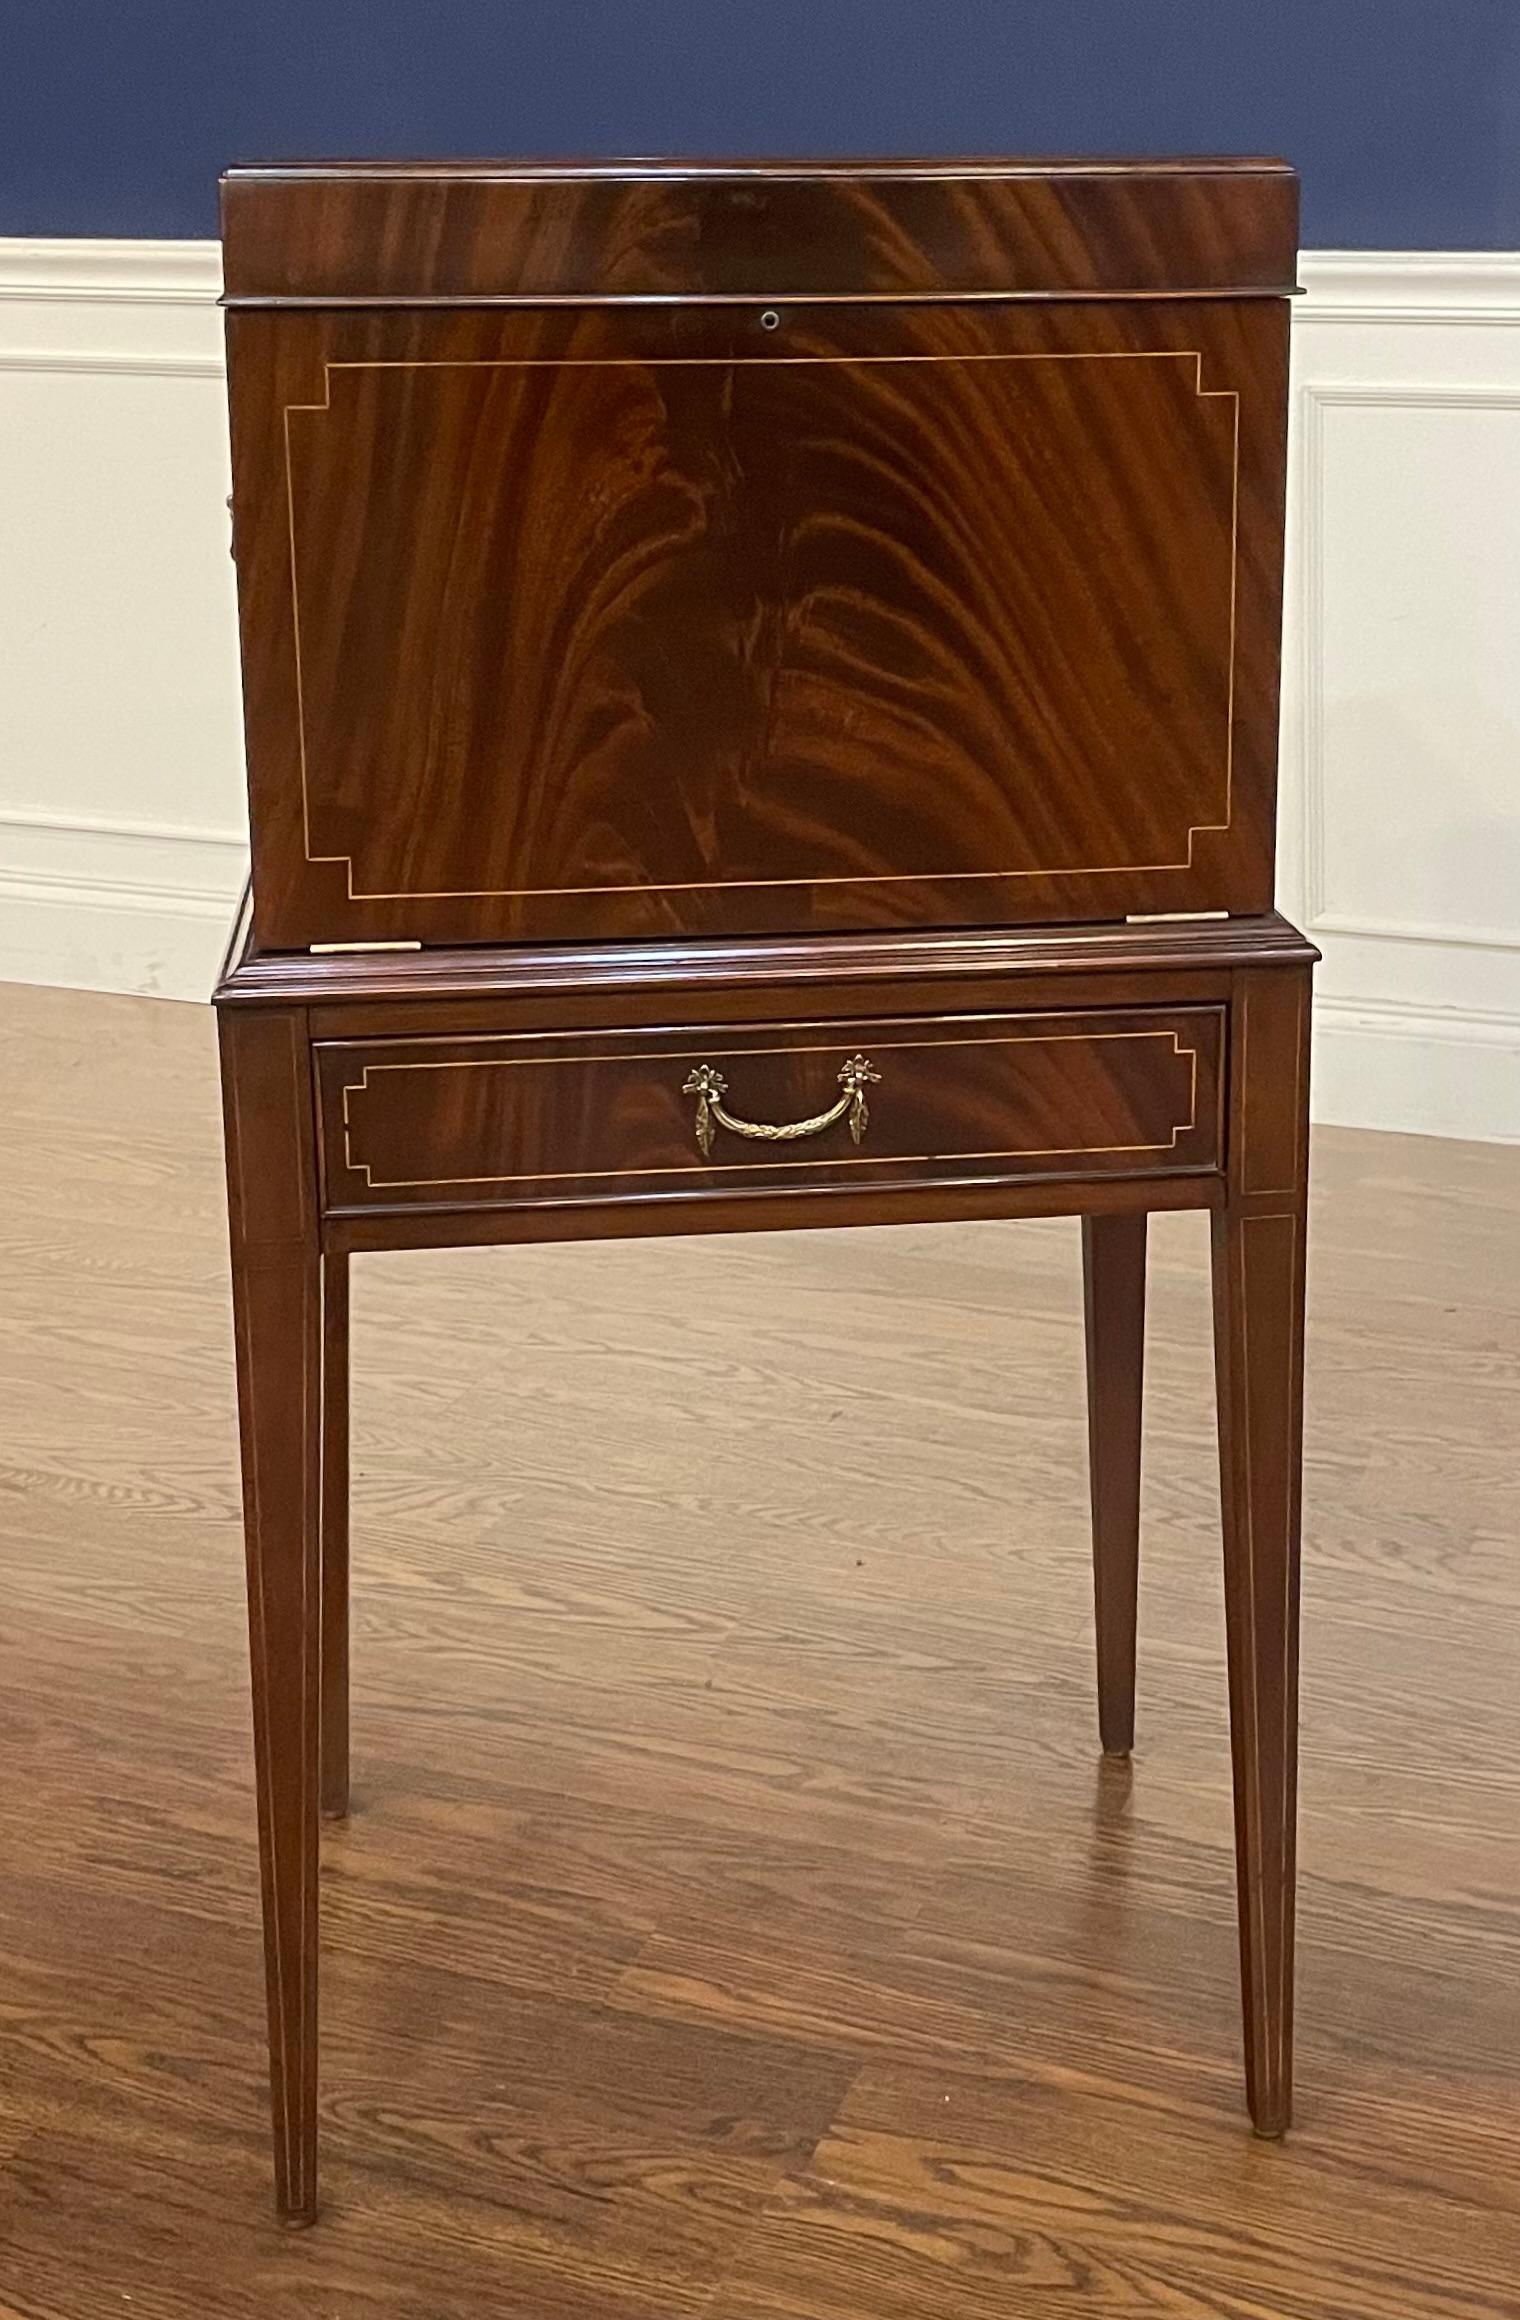 This is a traditional mahogany silverware chest by Leighton Hall.  It features swirly crotch mahogany with inlays and classic Hepplewhite style square tapered legs.  There are four drawers and a top tray for silverware.  There are silverware inserts